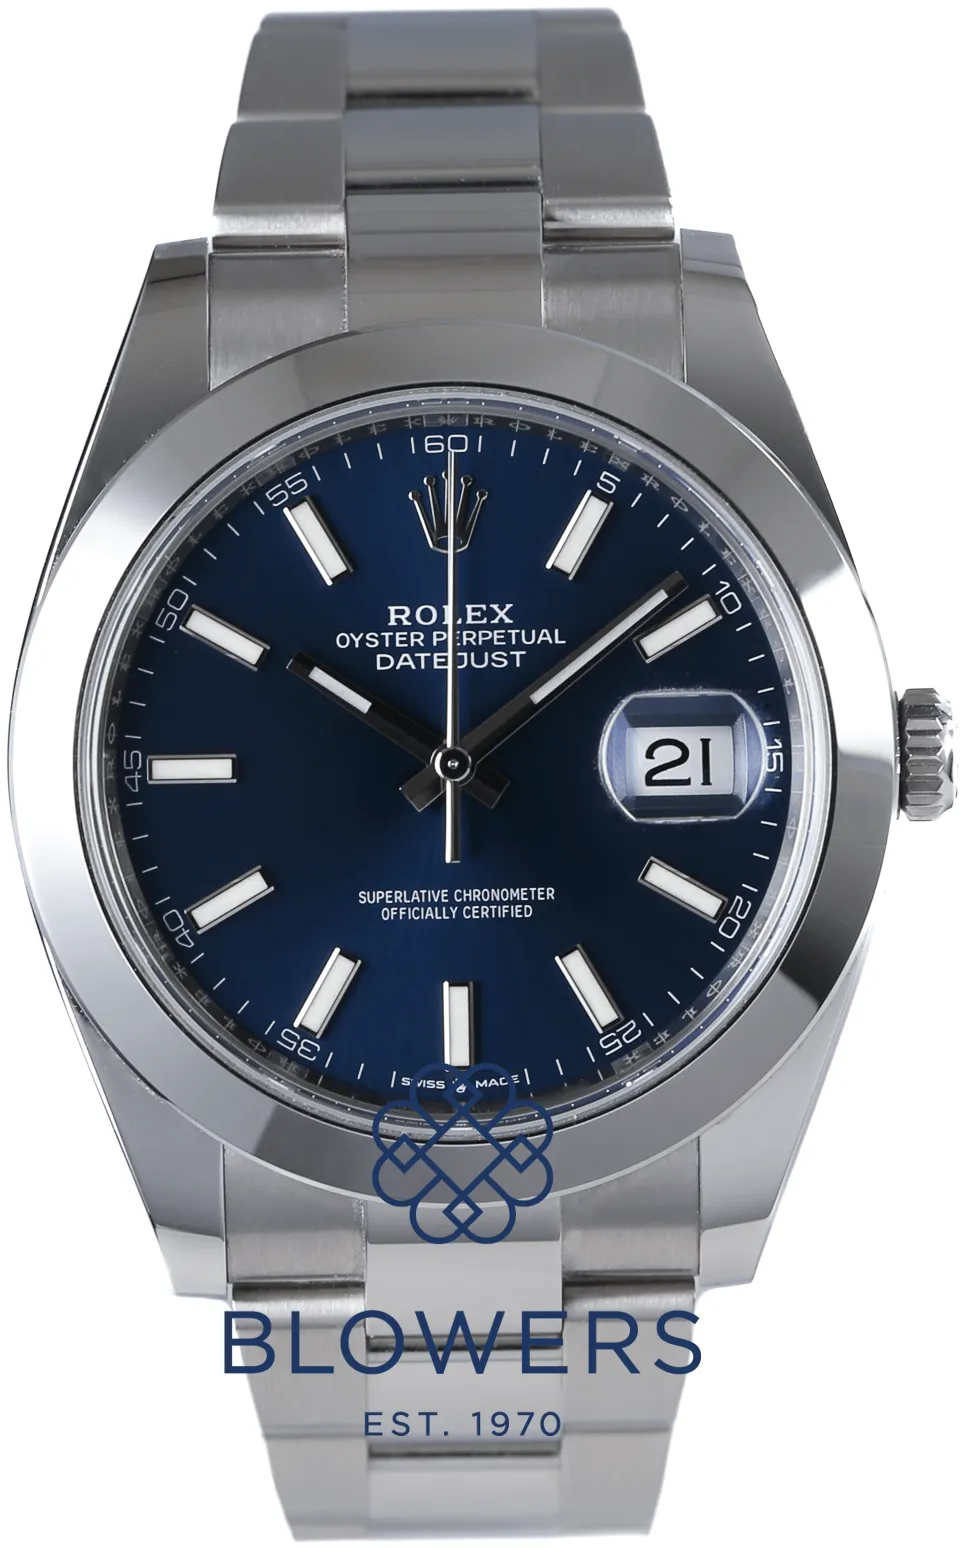 Rolex Oyster Perpetual "Datejust" 126300 41mm Stainless steel Blue